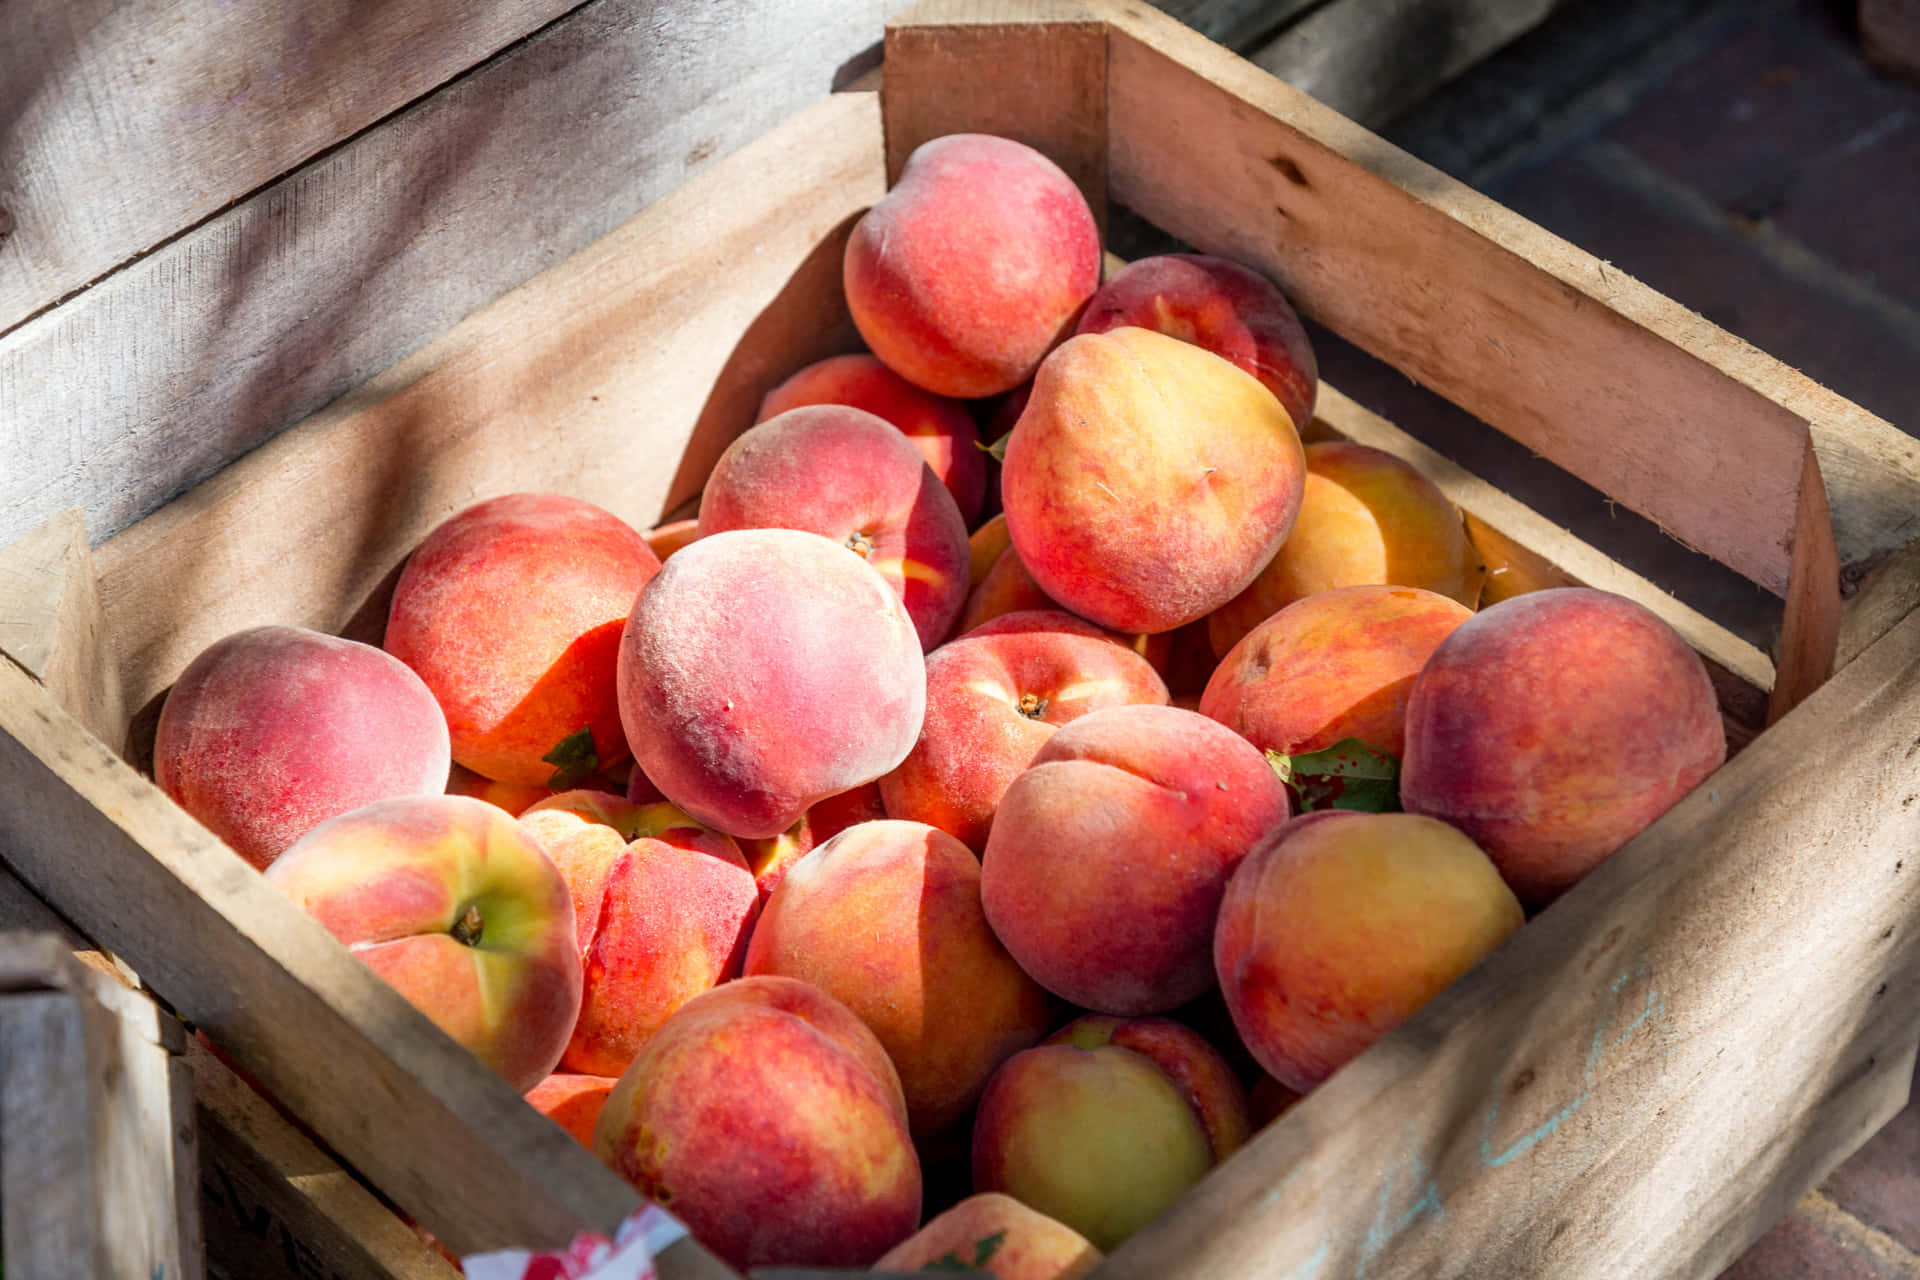 Peaches In A Wooden Crate